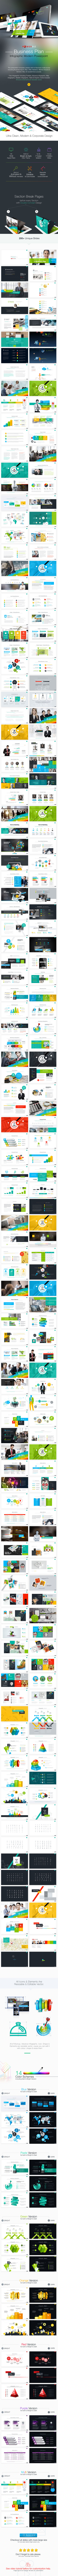 Graphicriver-Business-Pan-Report-Growth-Marketing-Statics-Clean-Modern-Top-Quality-Business-Powerpoint-Presentation-PPTX-Template